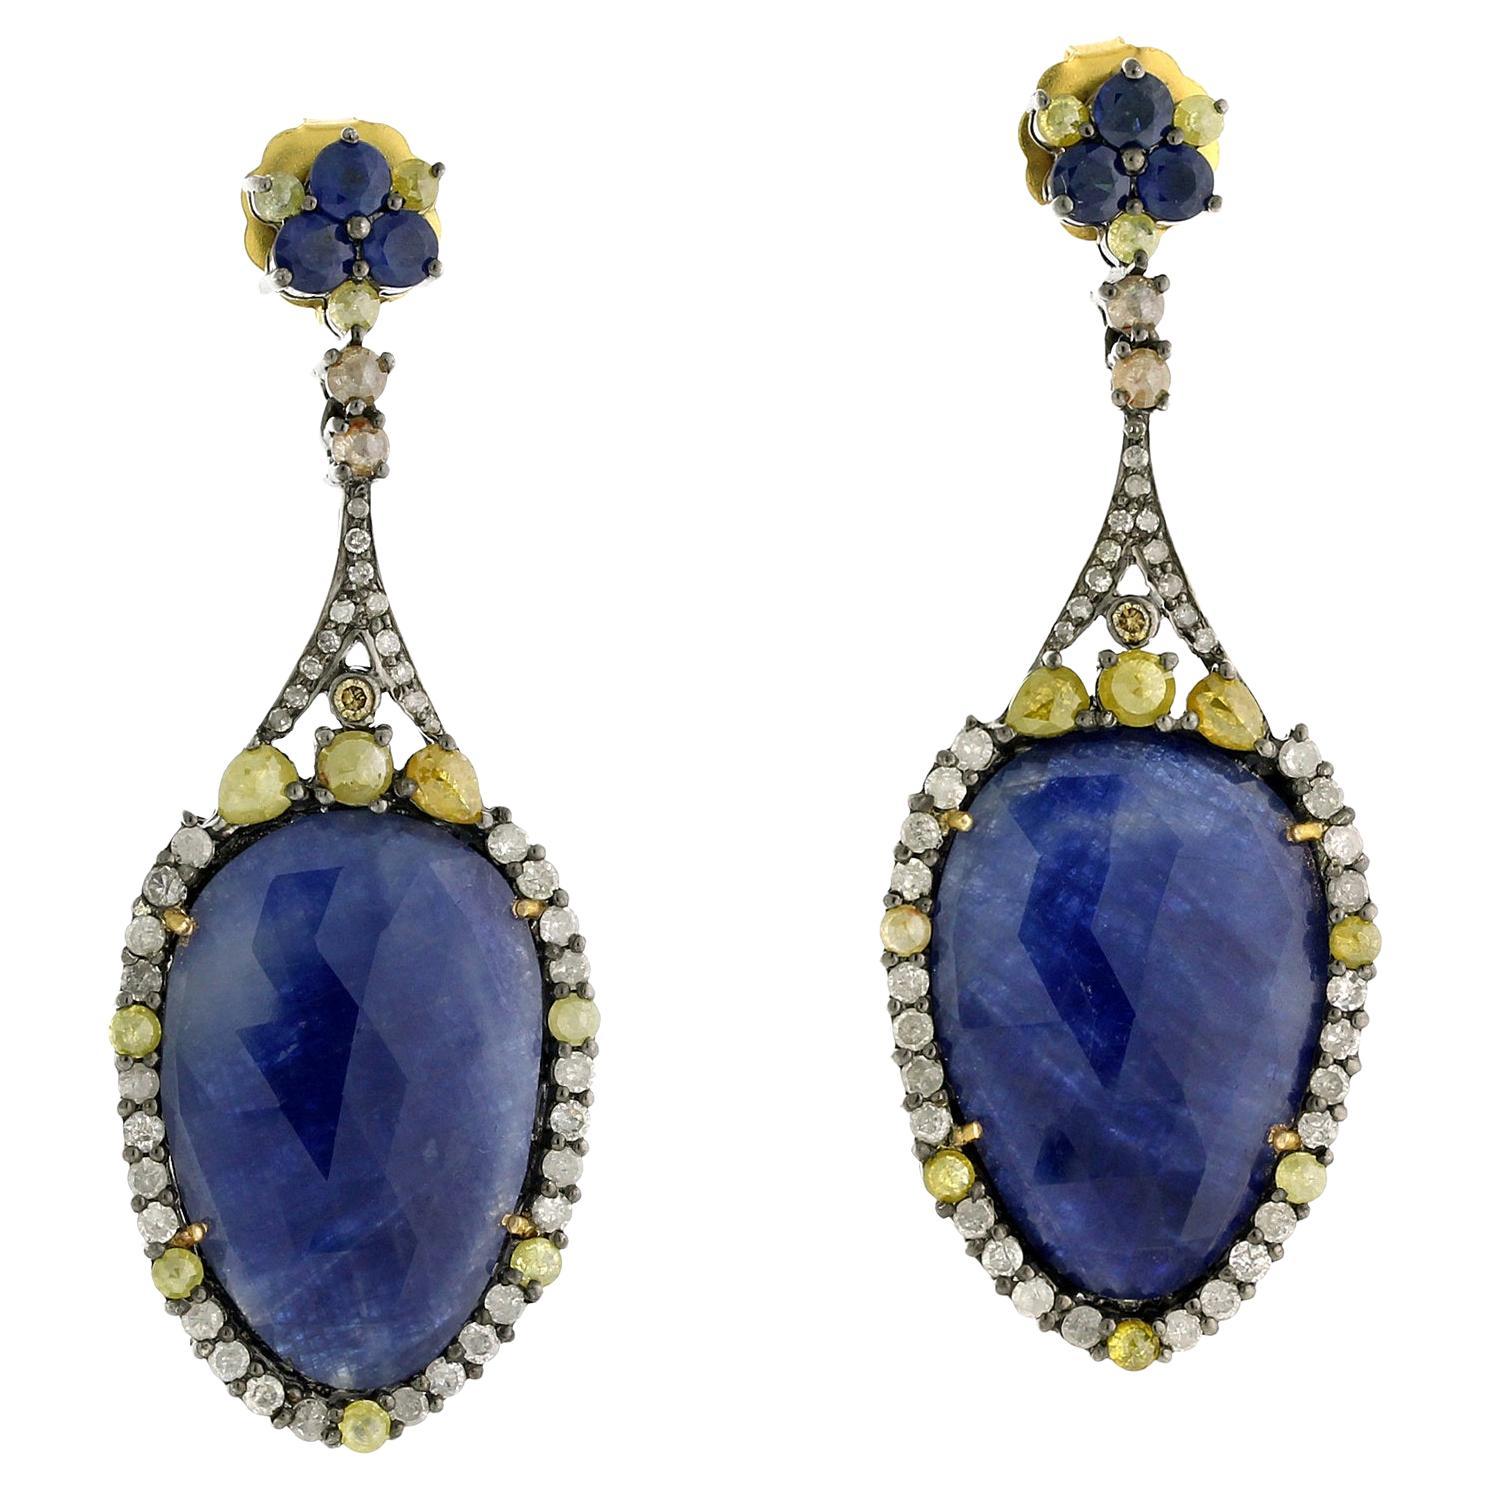 Pear Shaped Sapphire Dangle Earring With Pave Diamonds Made In 18k Gold & Silver For Sale